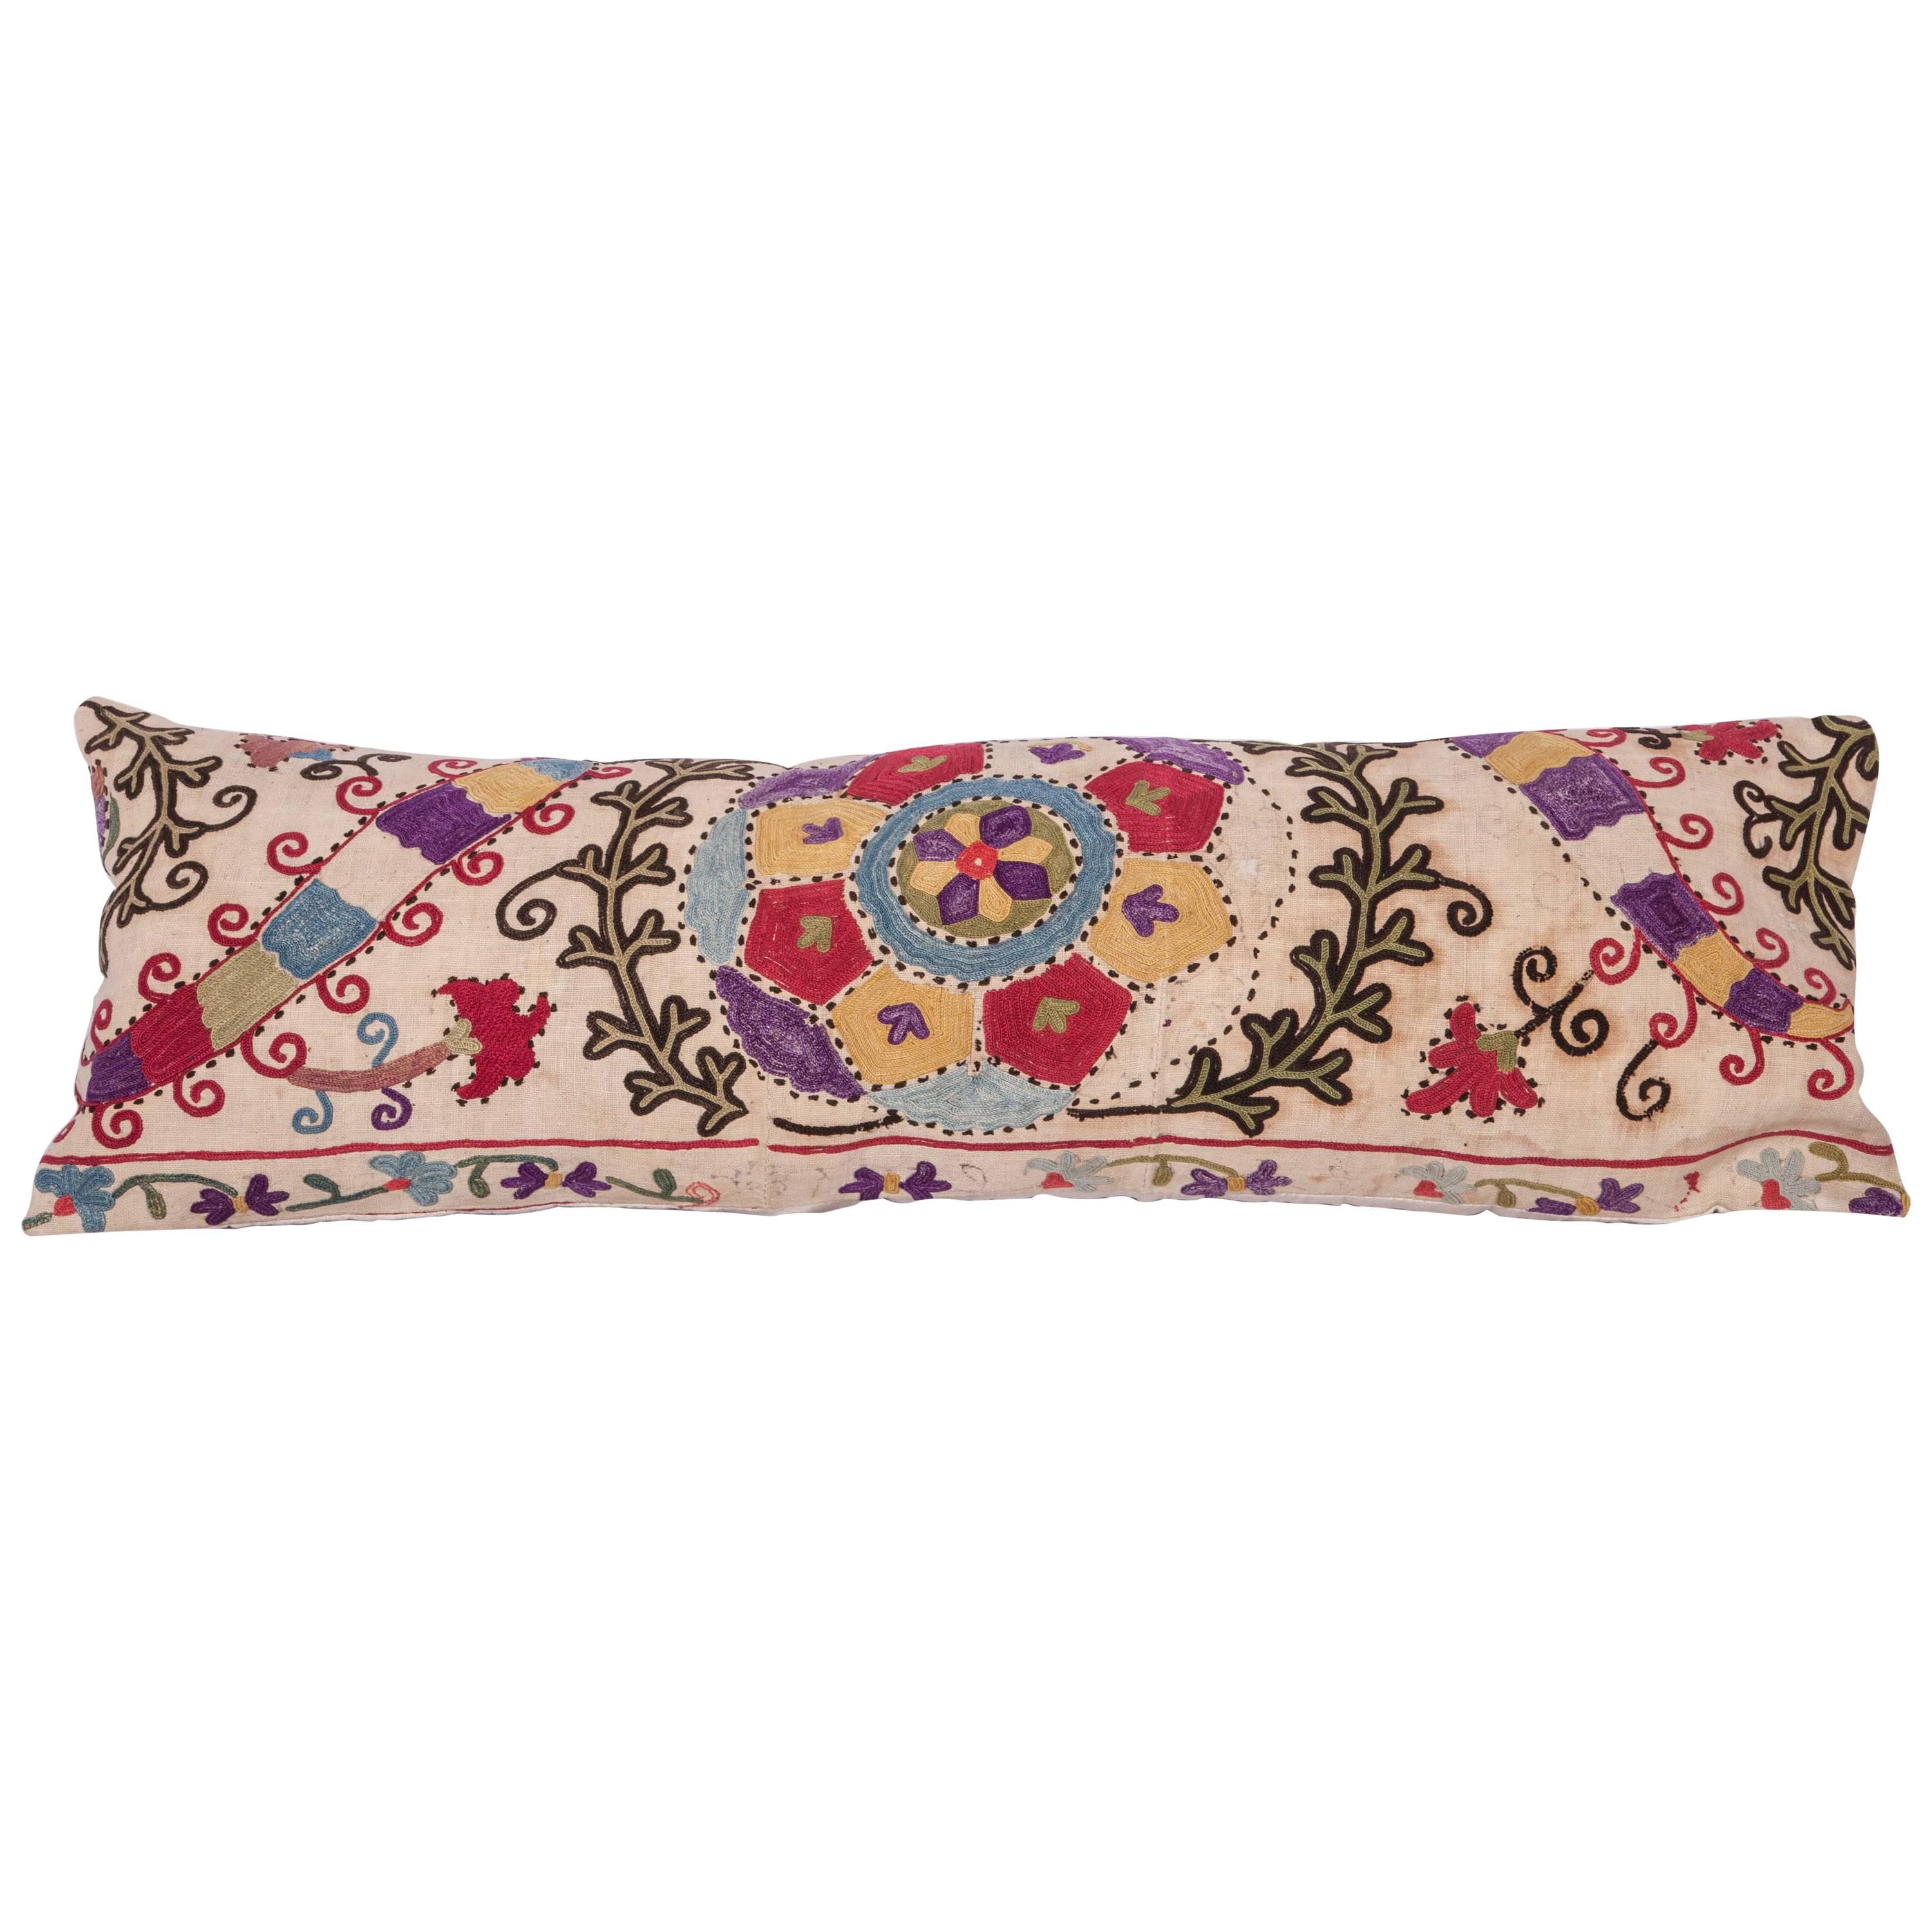 Antique Pillow Made Out of a Late19th Century, Uzbek Bukhara Suzani